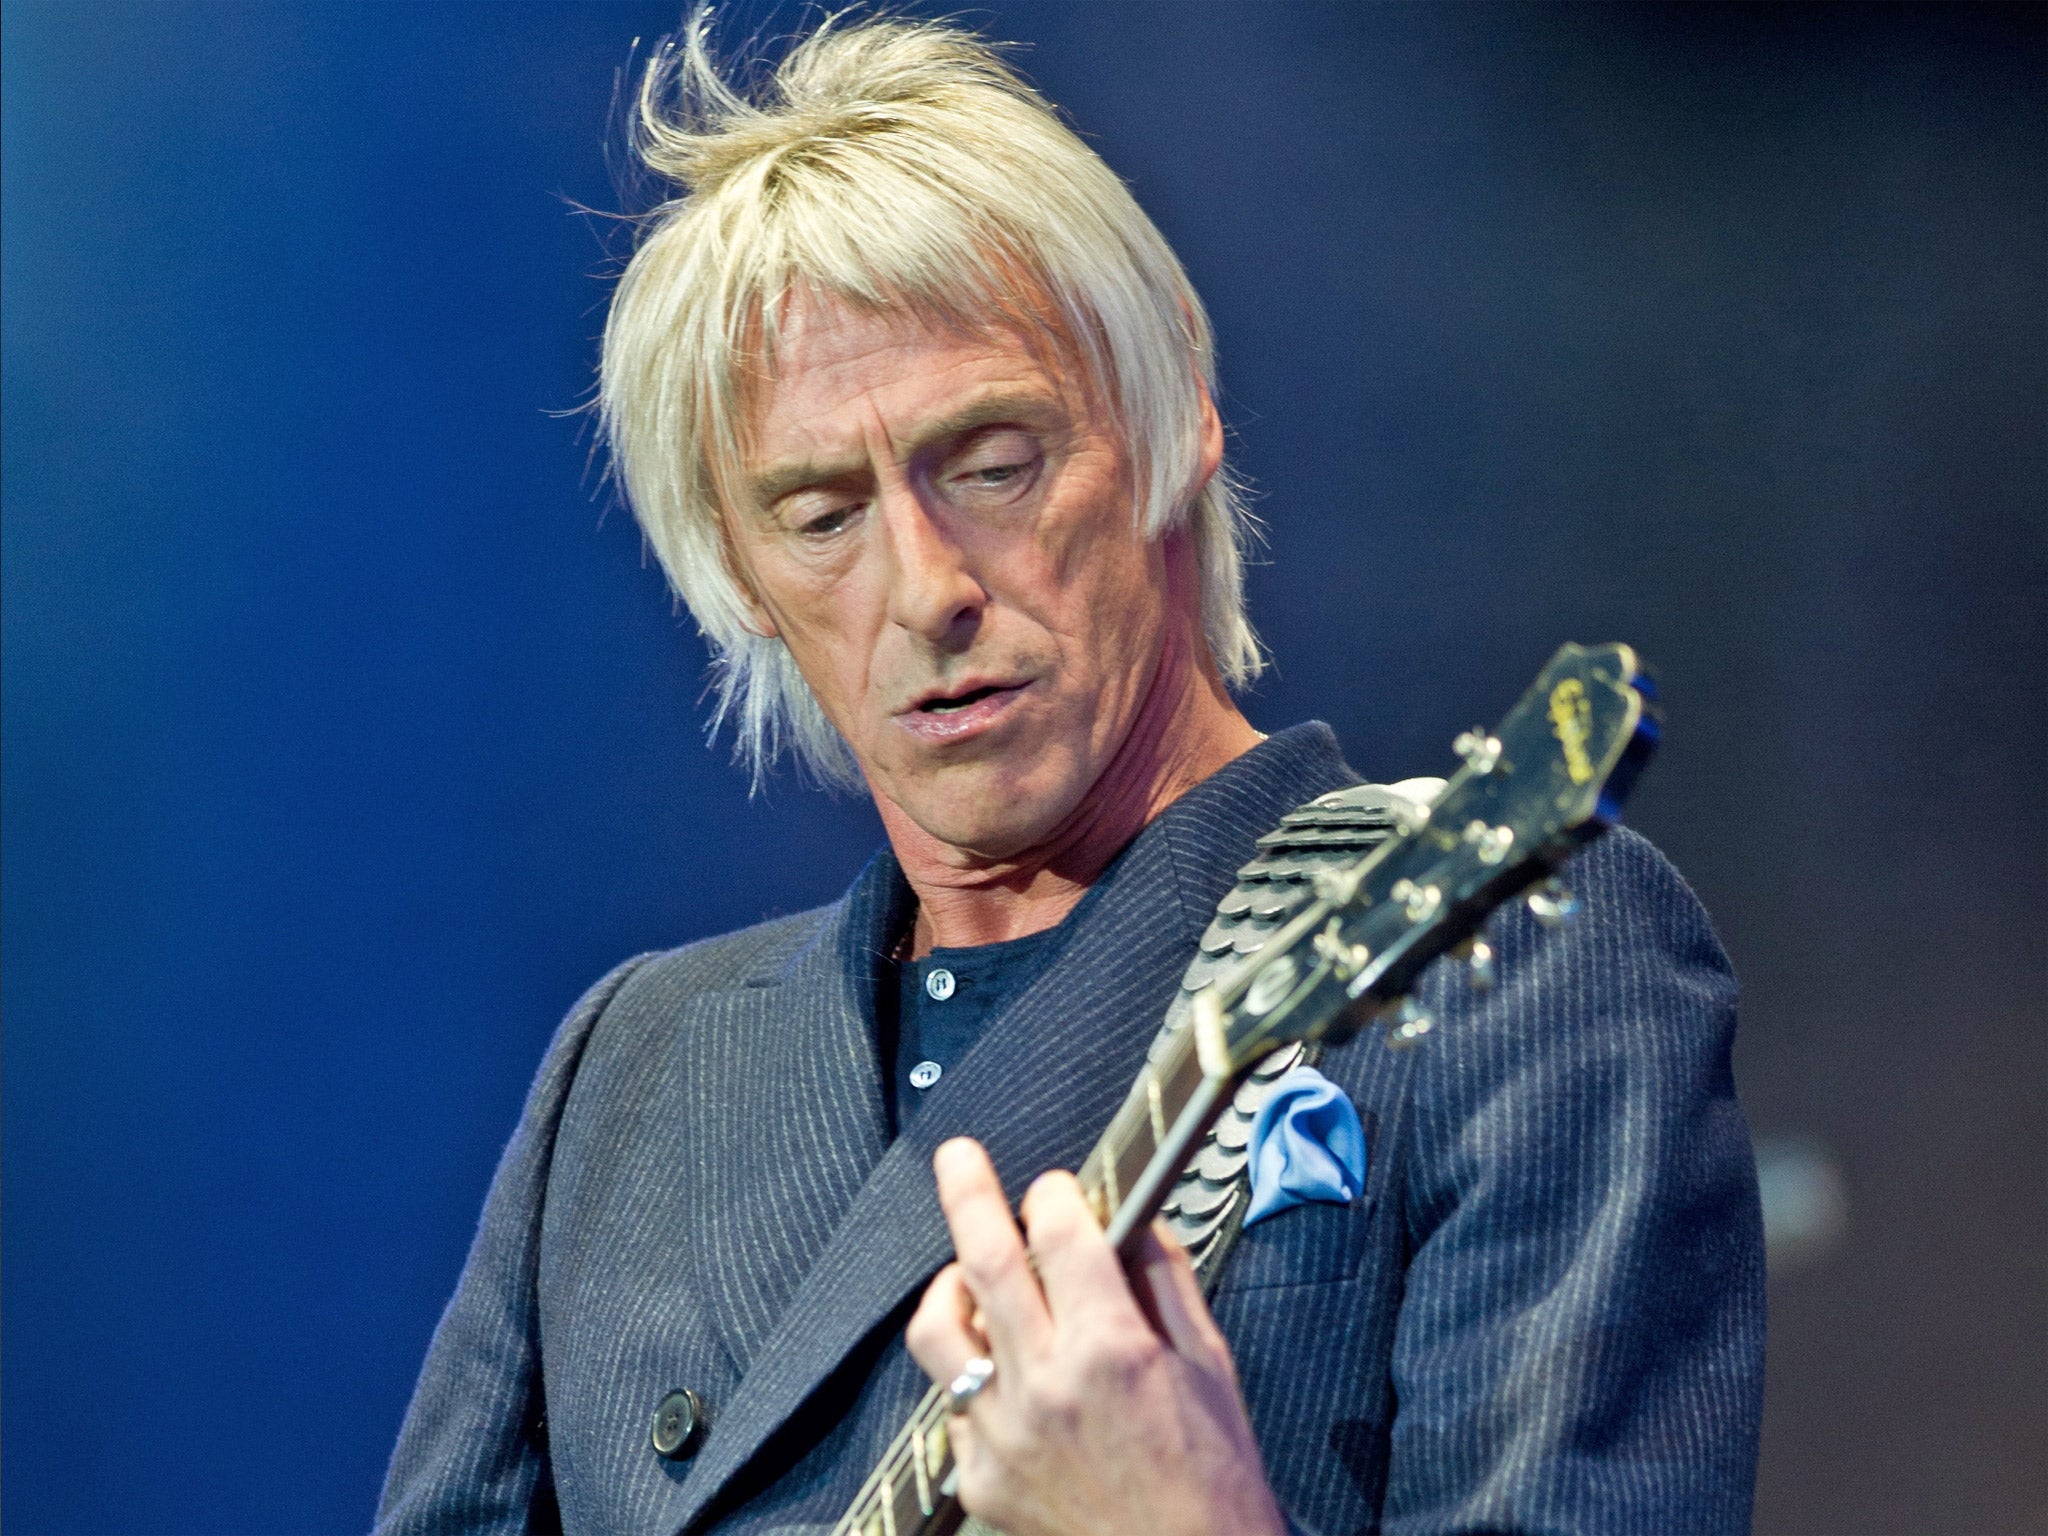 Paul Weller, aka the Modfather, performing at last year’s Isle of Wight Festival in Newport